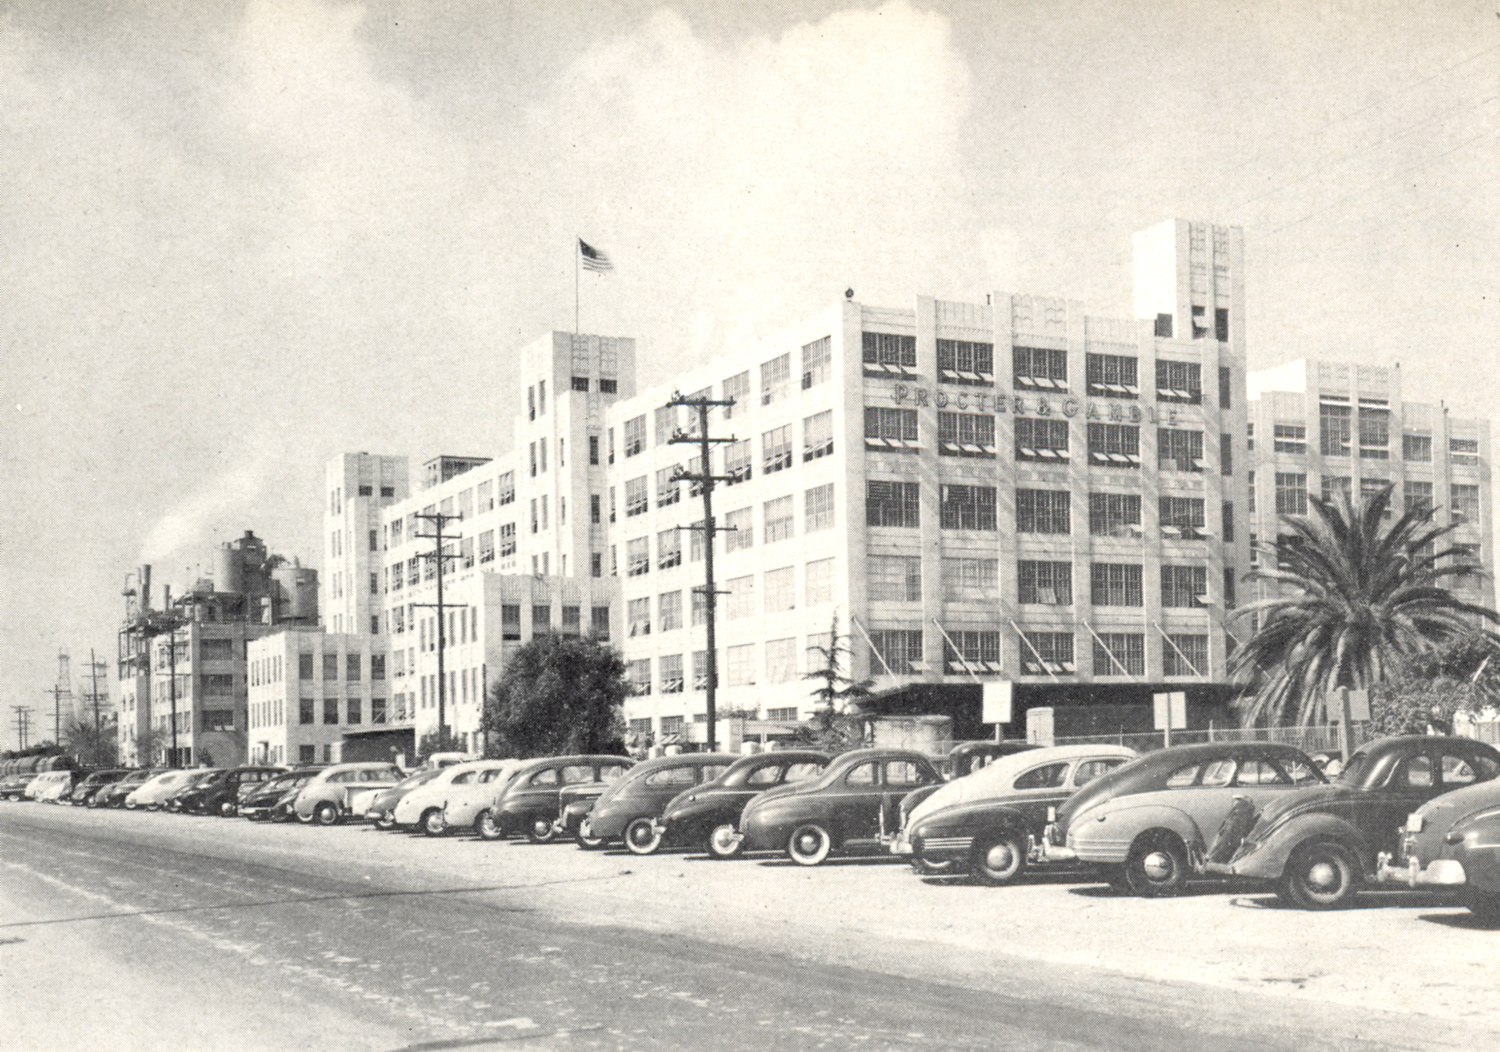 The Procter & Gamble plant, seen here in probably the late 1940s, opened in 1930 on the Seventh Street Peninsula, now Pier C and the site of the Matson/SSA terminal today.